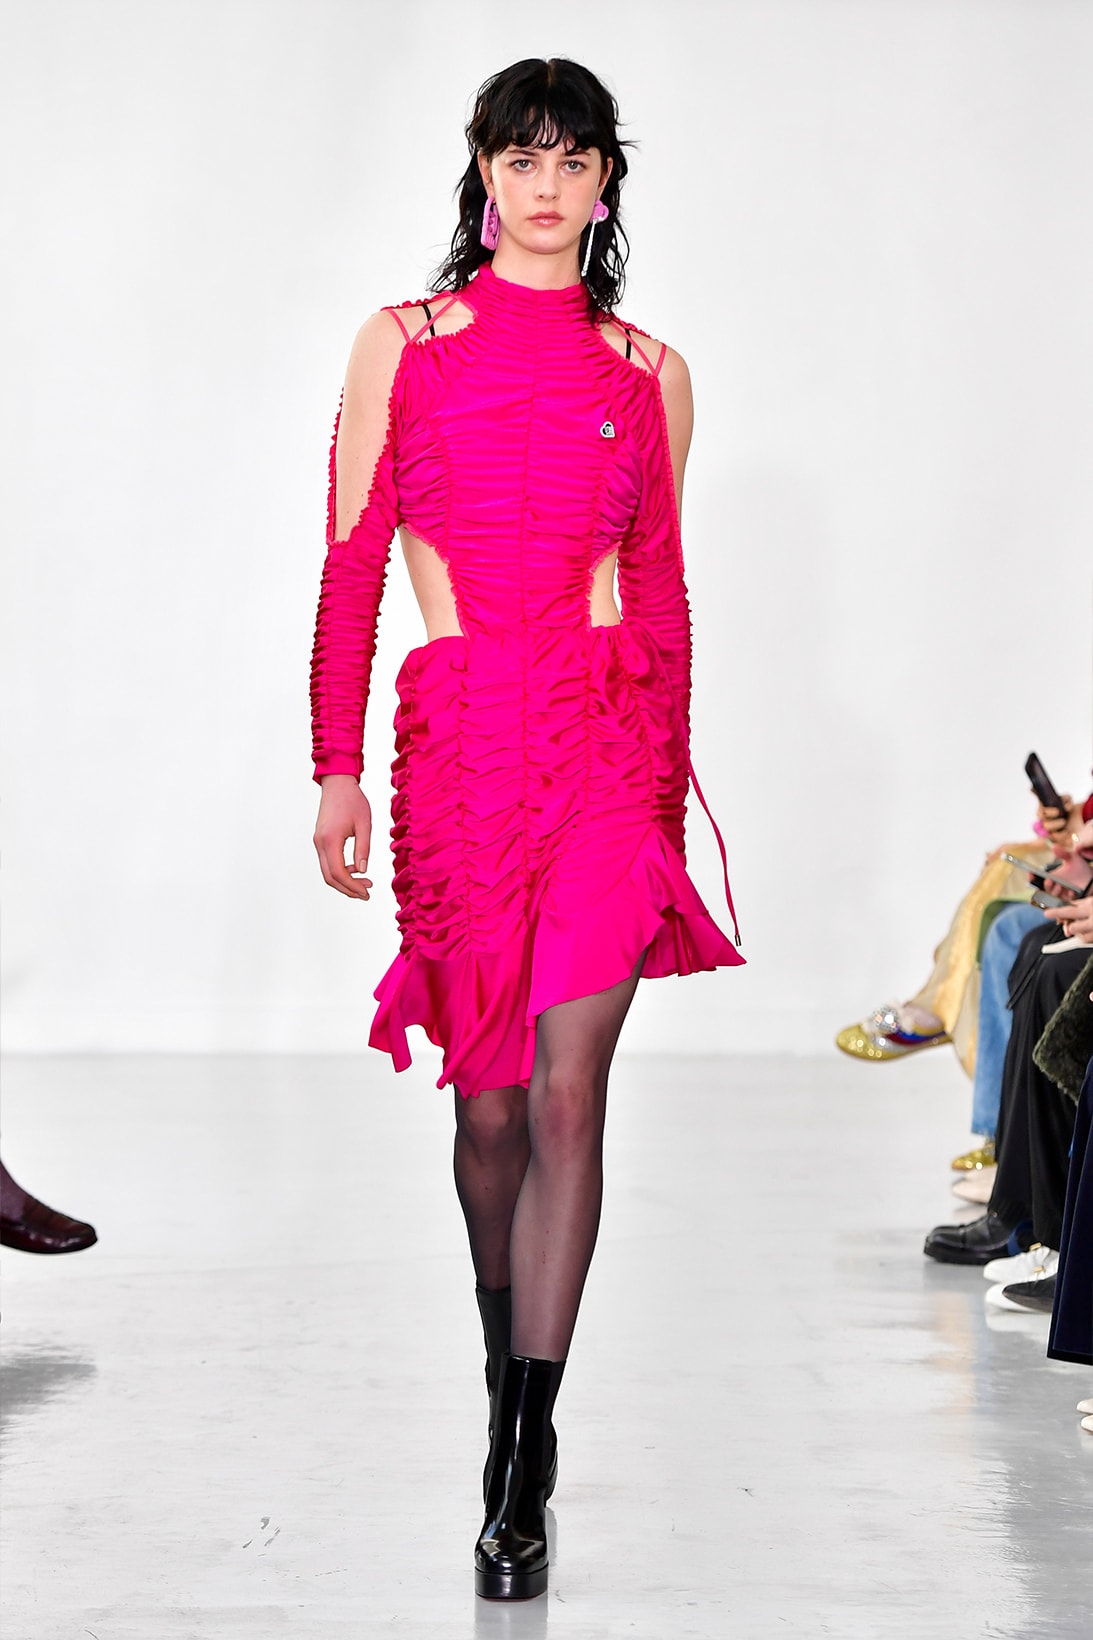 Ester Manas Fall Winter Collection Size Inclusivity Cut-Outs Fashion Week Runway Show Photos Shocking Pink Dress